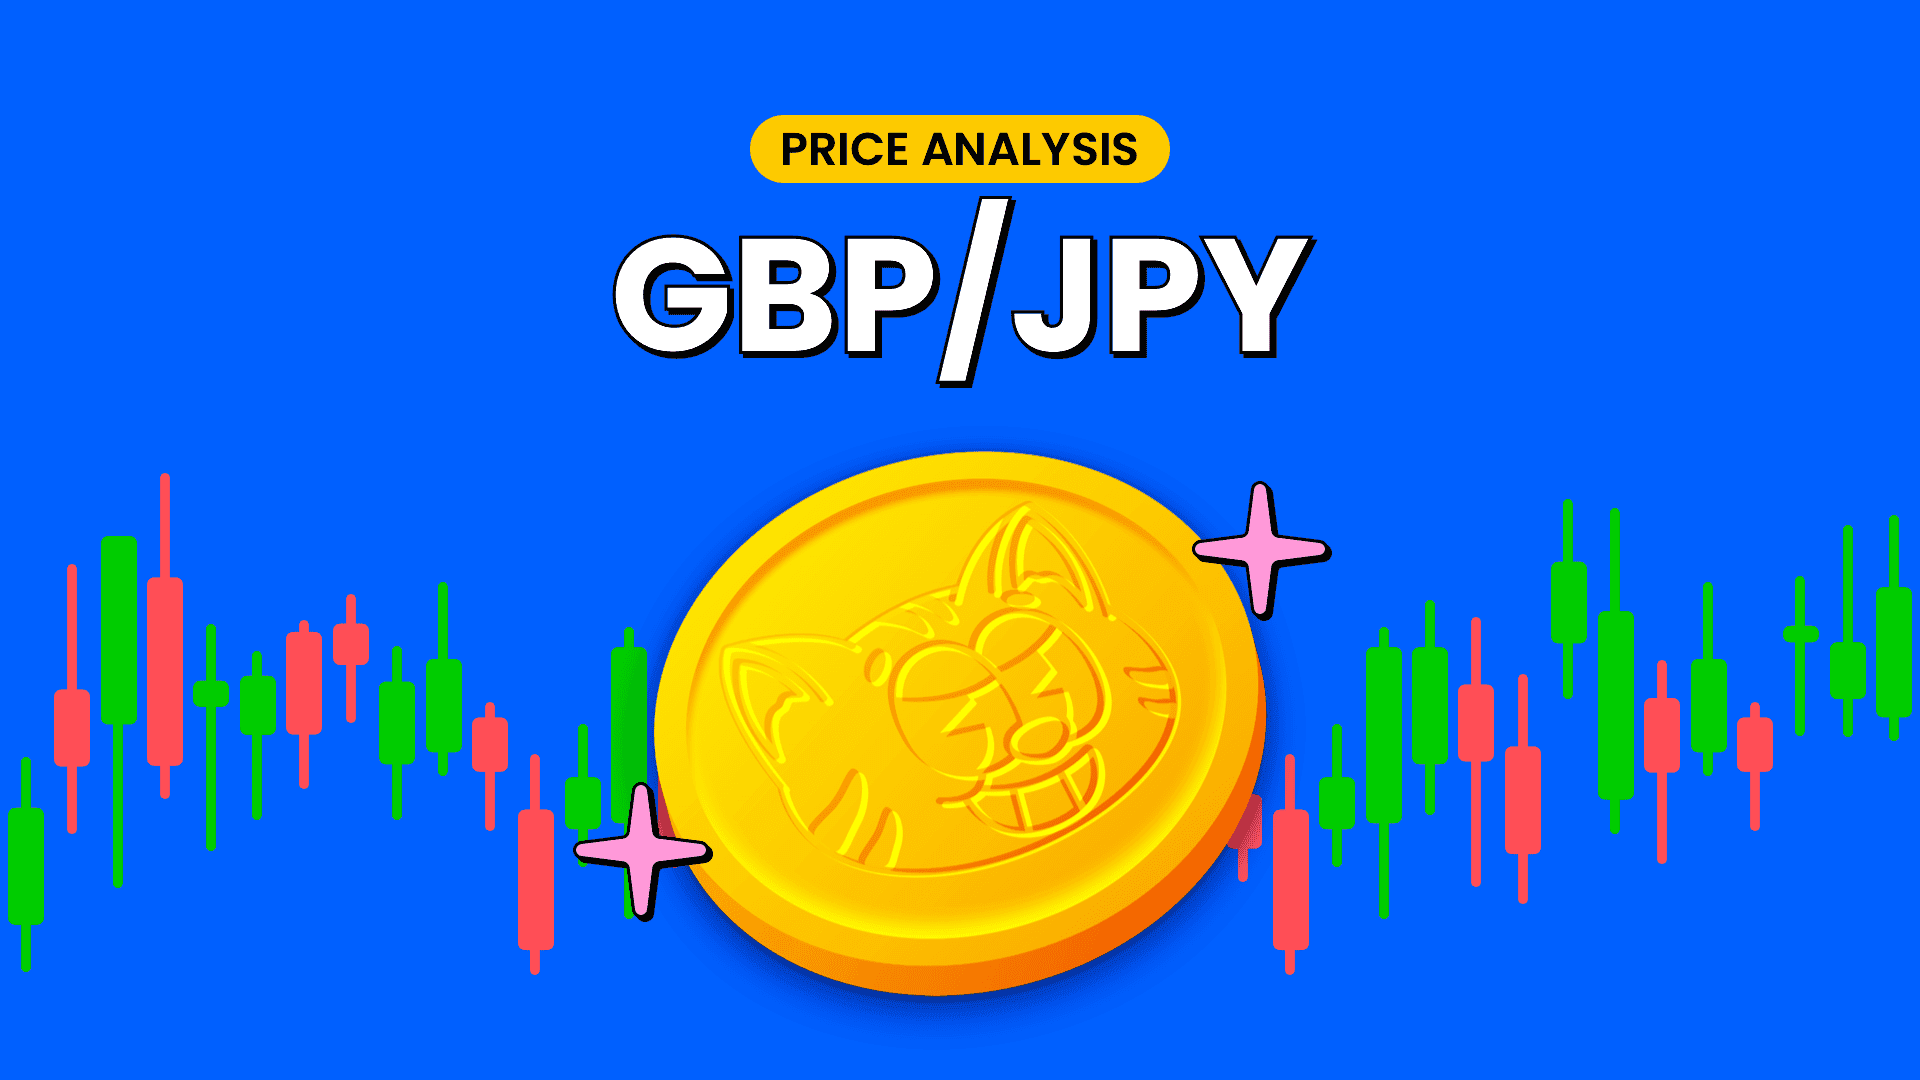 GBPJPY-SNABS-BRITISH-POUND-ATTEMPTED-RECOVERY-Feature-Image-7MiUO.png